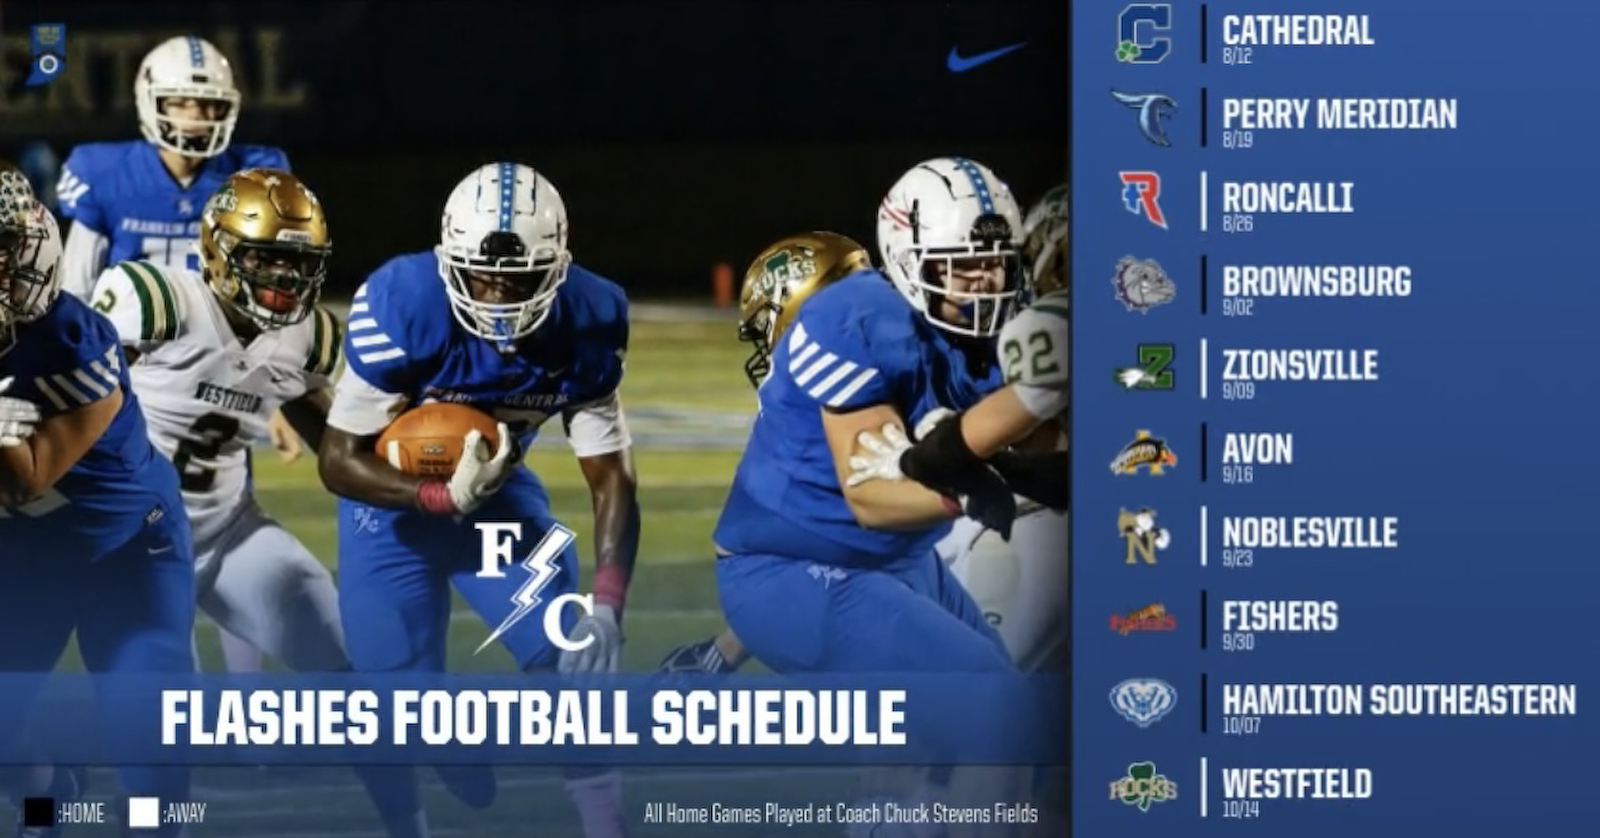 Flashes Football Schedule cover photo